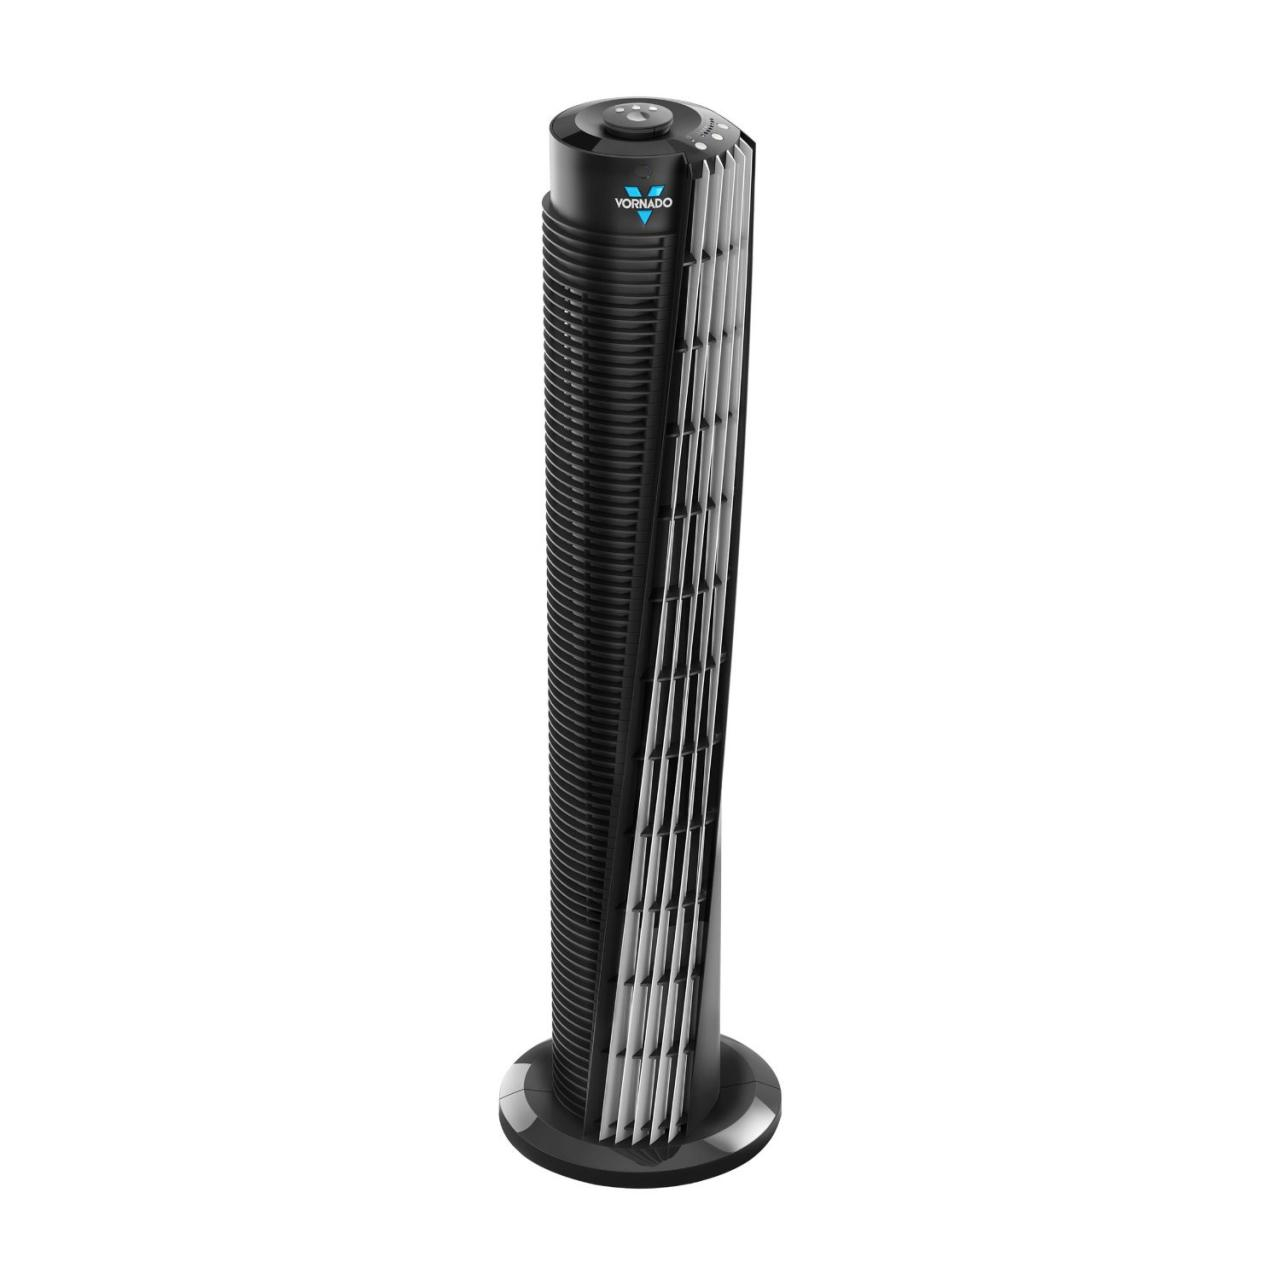 Top 10 Best Cooling Tower Fans For Rooms 2020 Cooling in dimensions 1280 X 1280